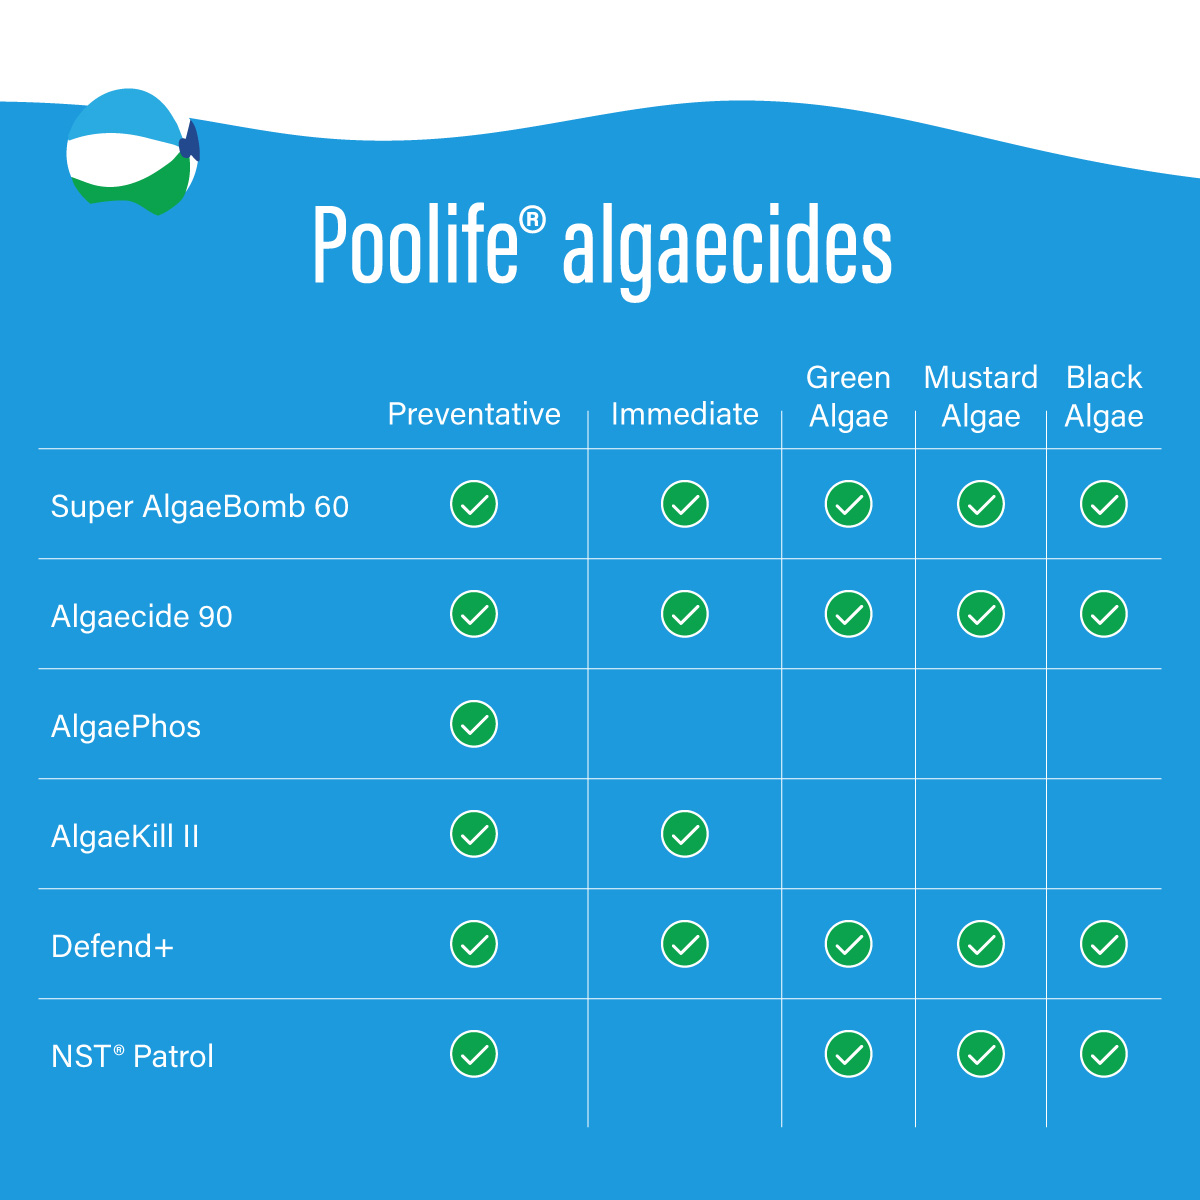 Poolife algaecides chart showing checks for this product: Preventative, Immediate